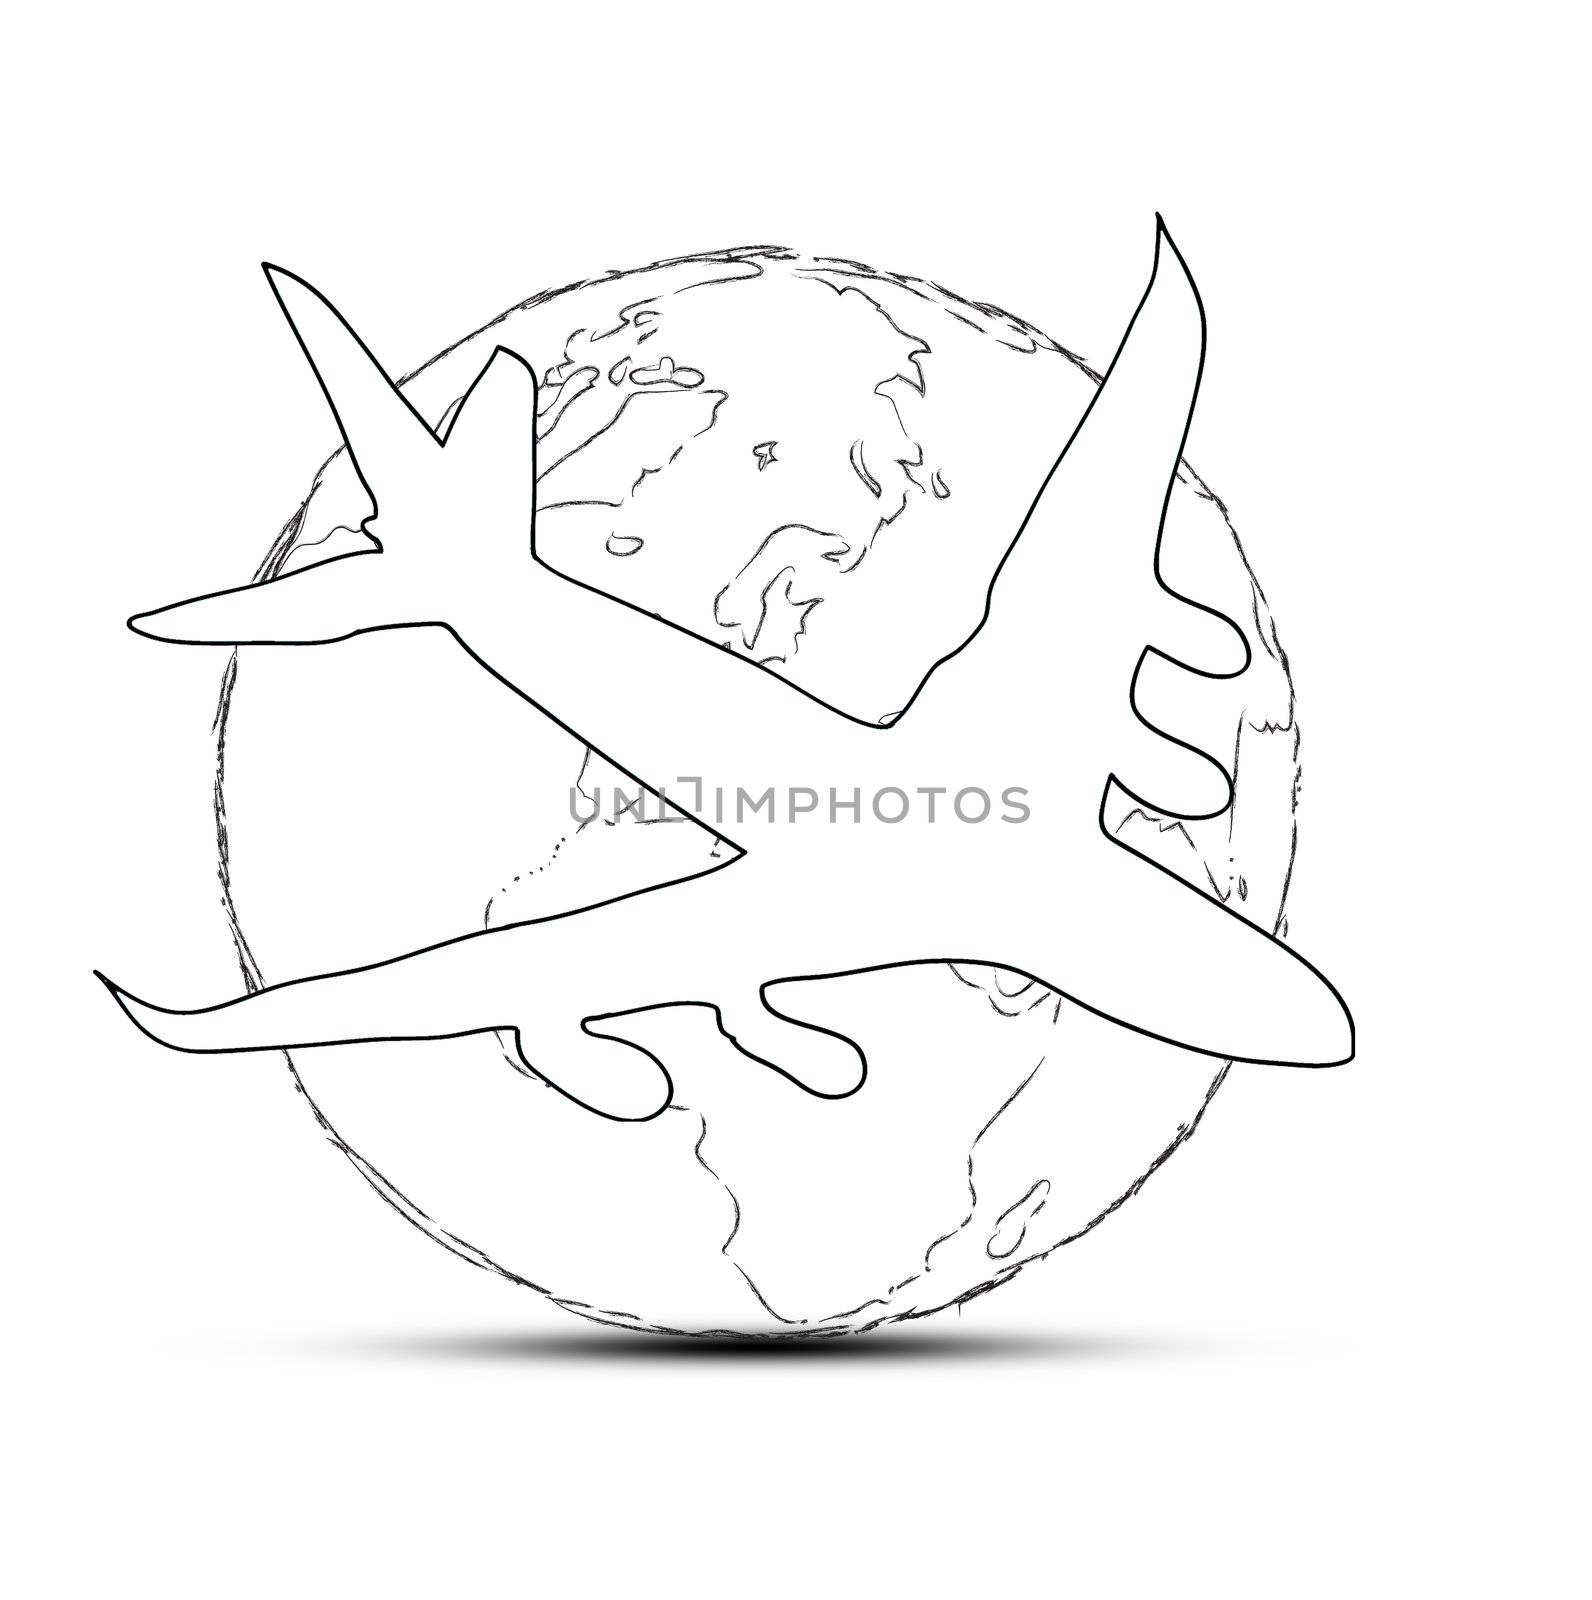 World travel concept: the Earth and a plane by rufous